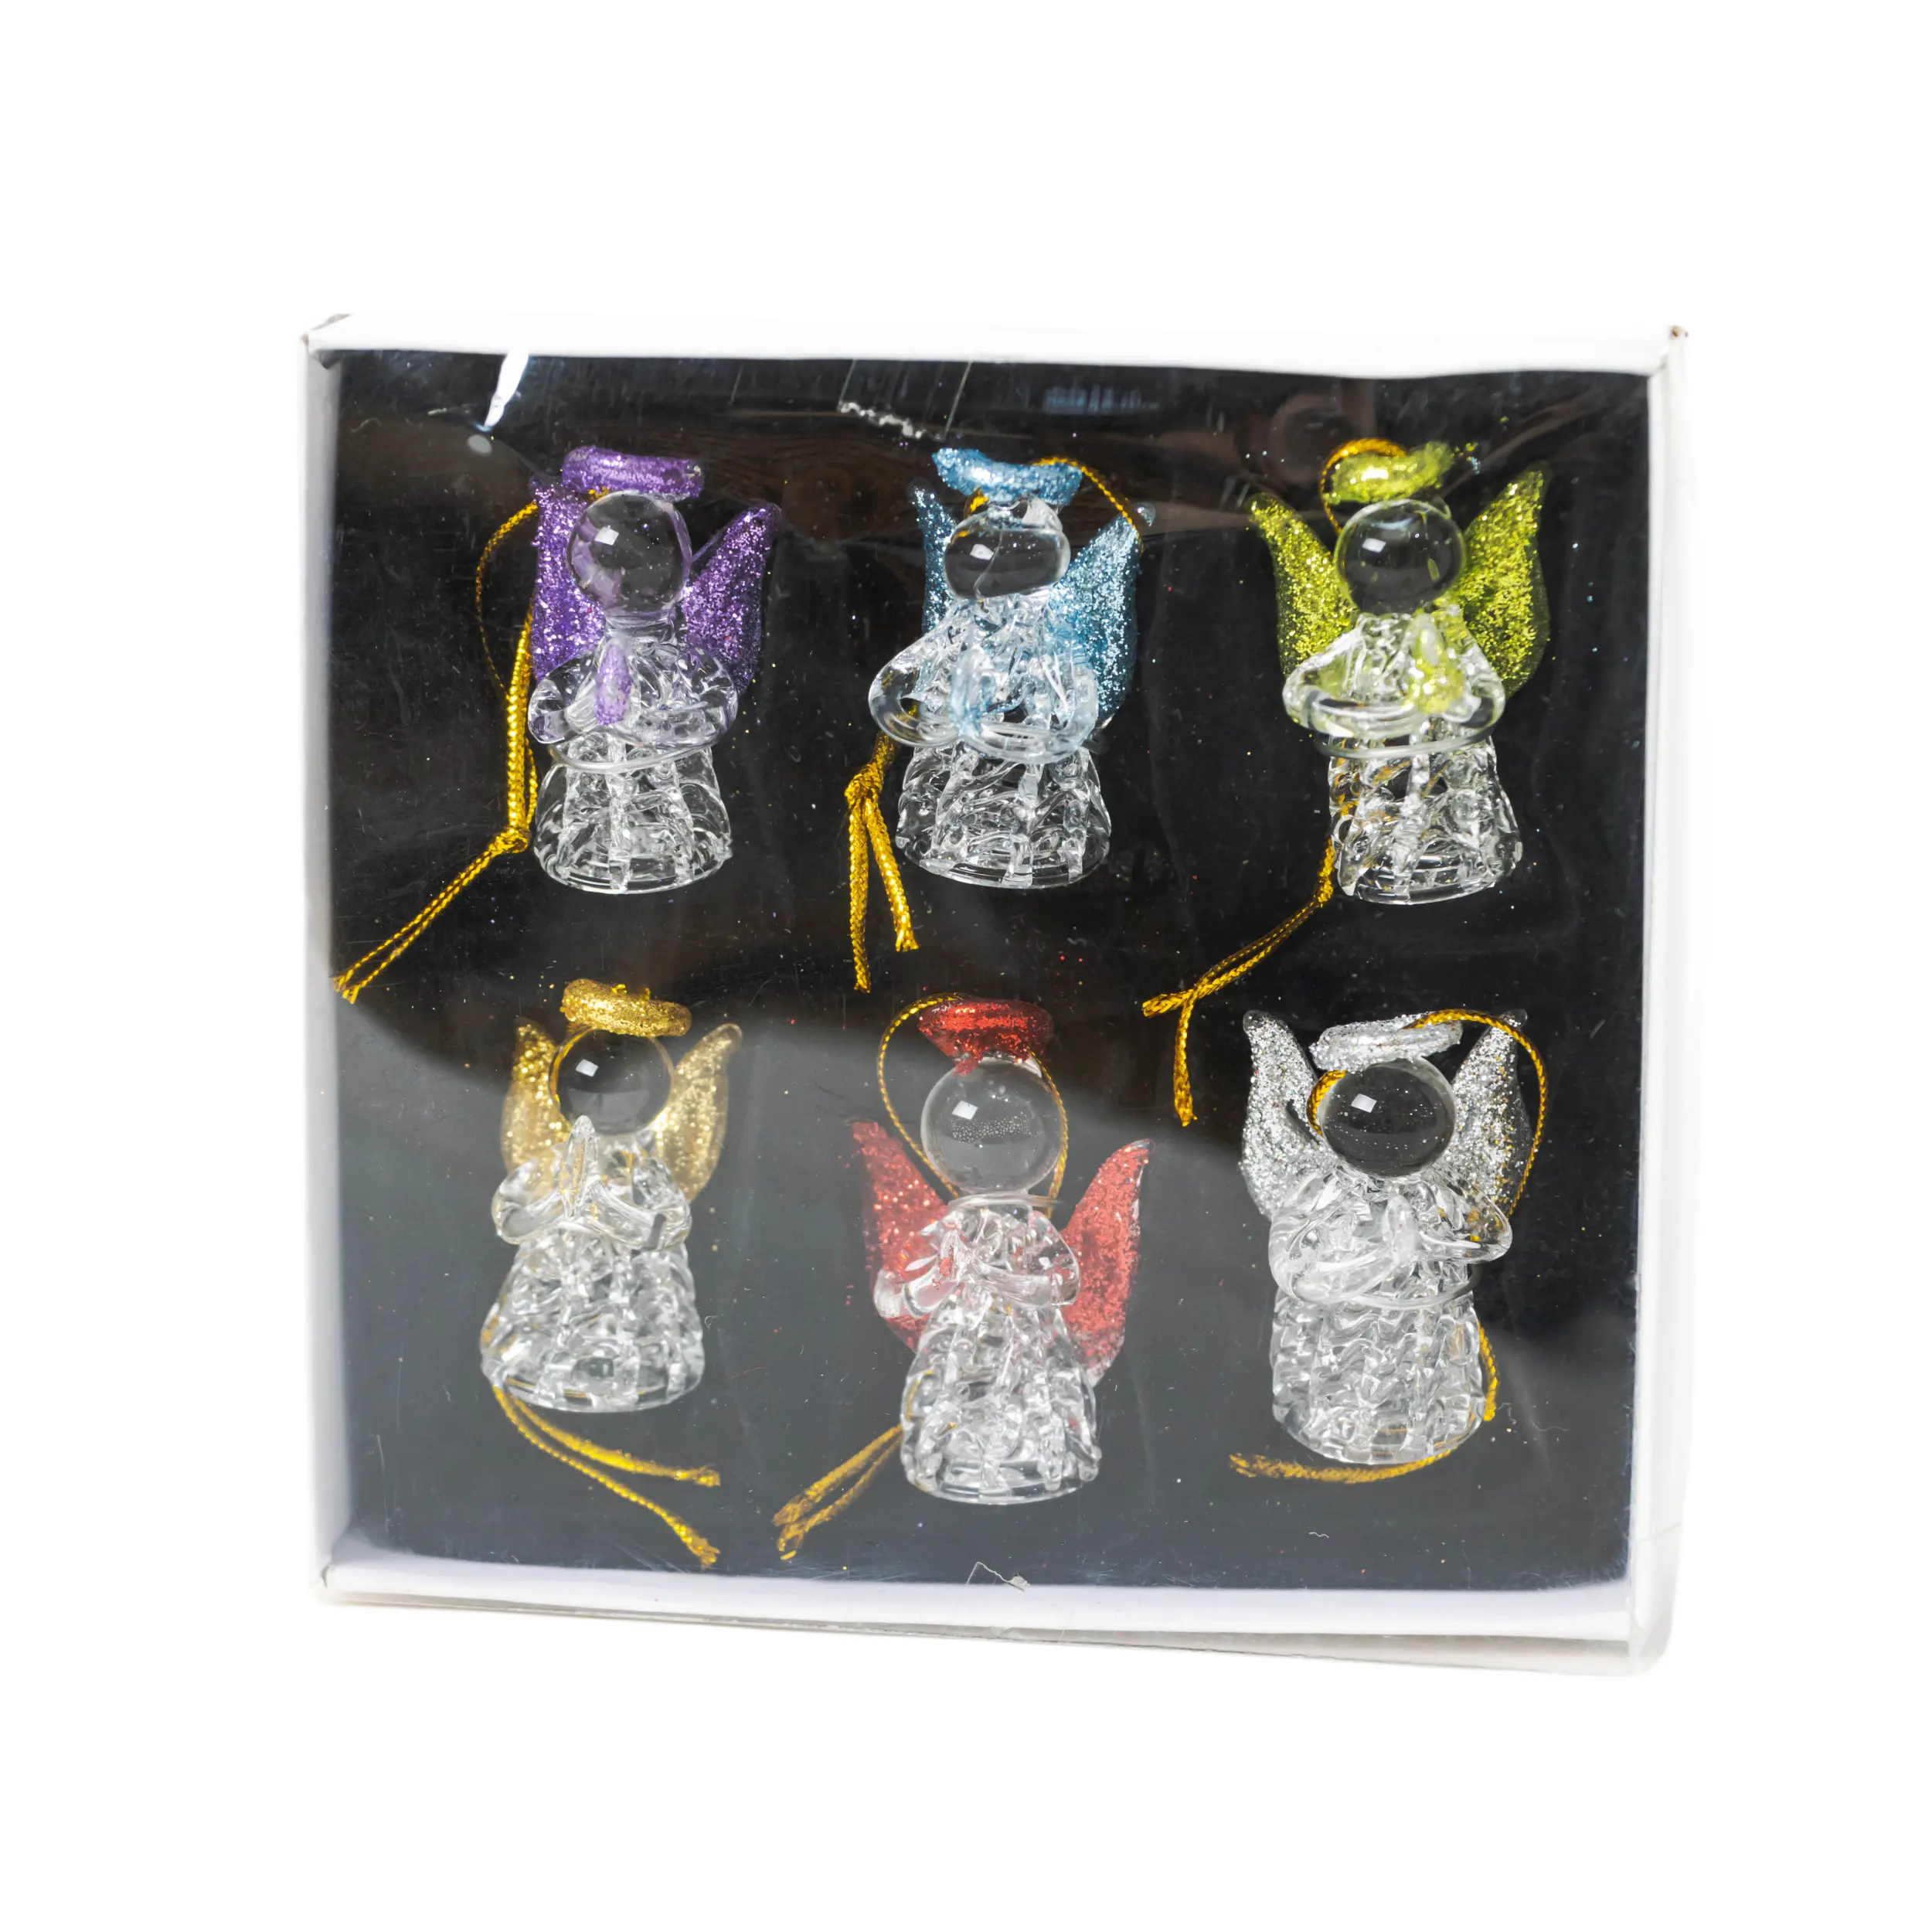 Little Guardian: Delicate Handmade Glass Angel - An Ideal Standalone Gift for Cherishing Moments